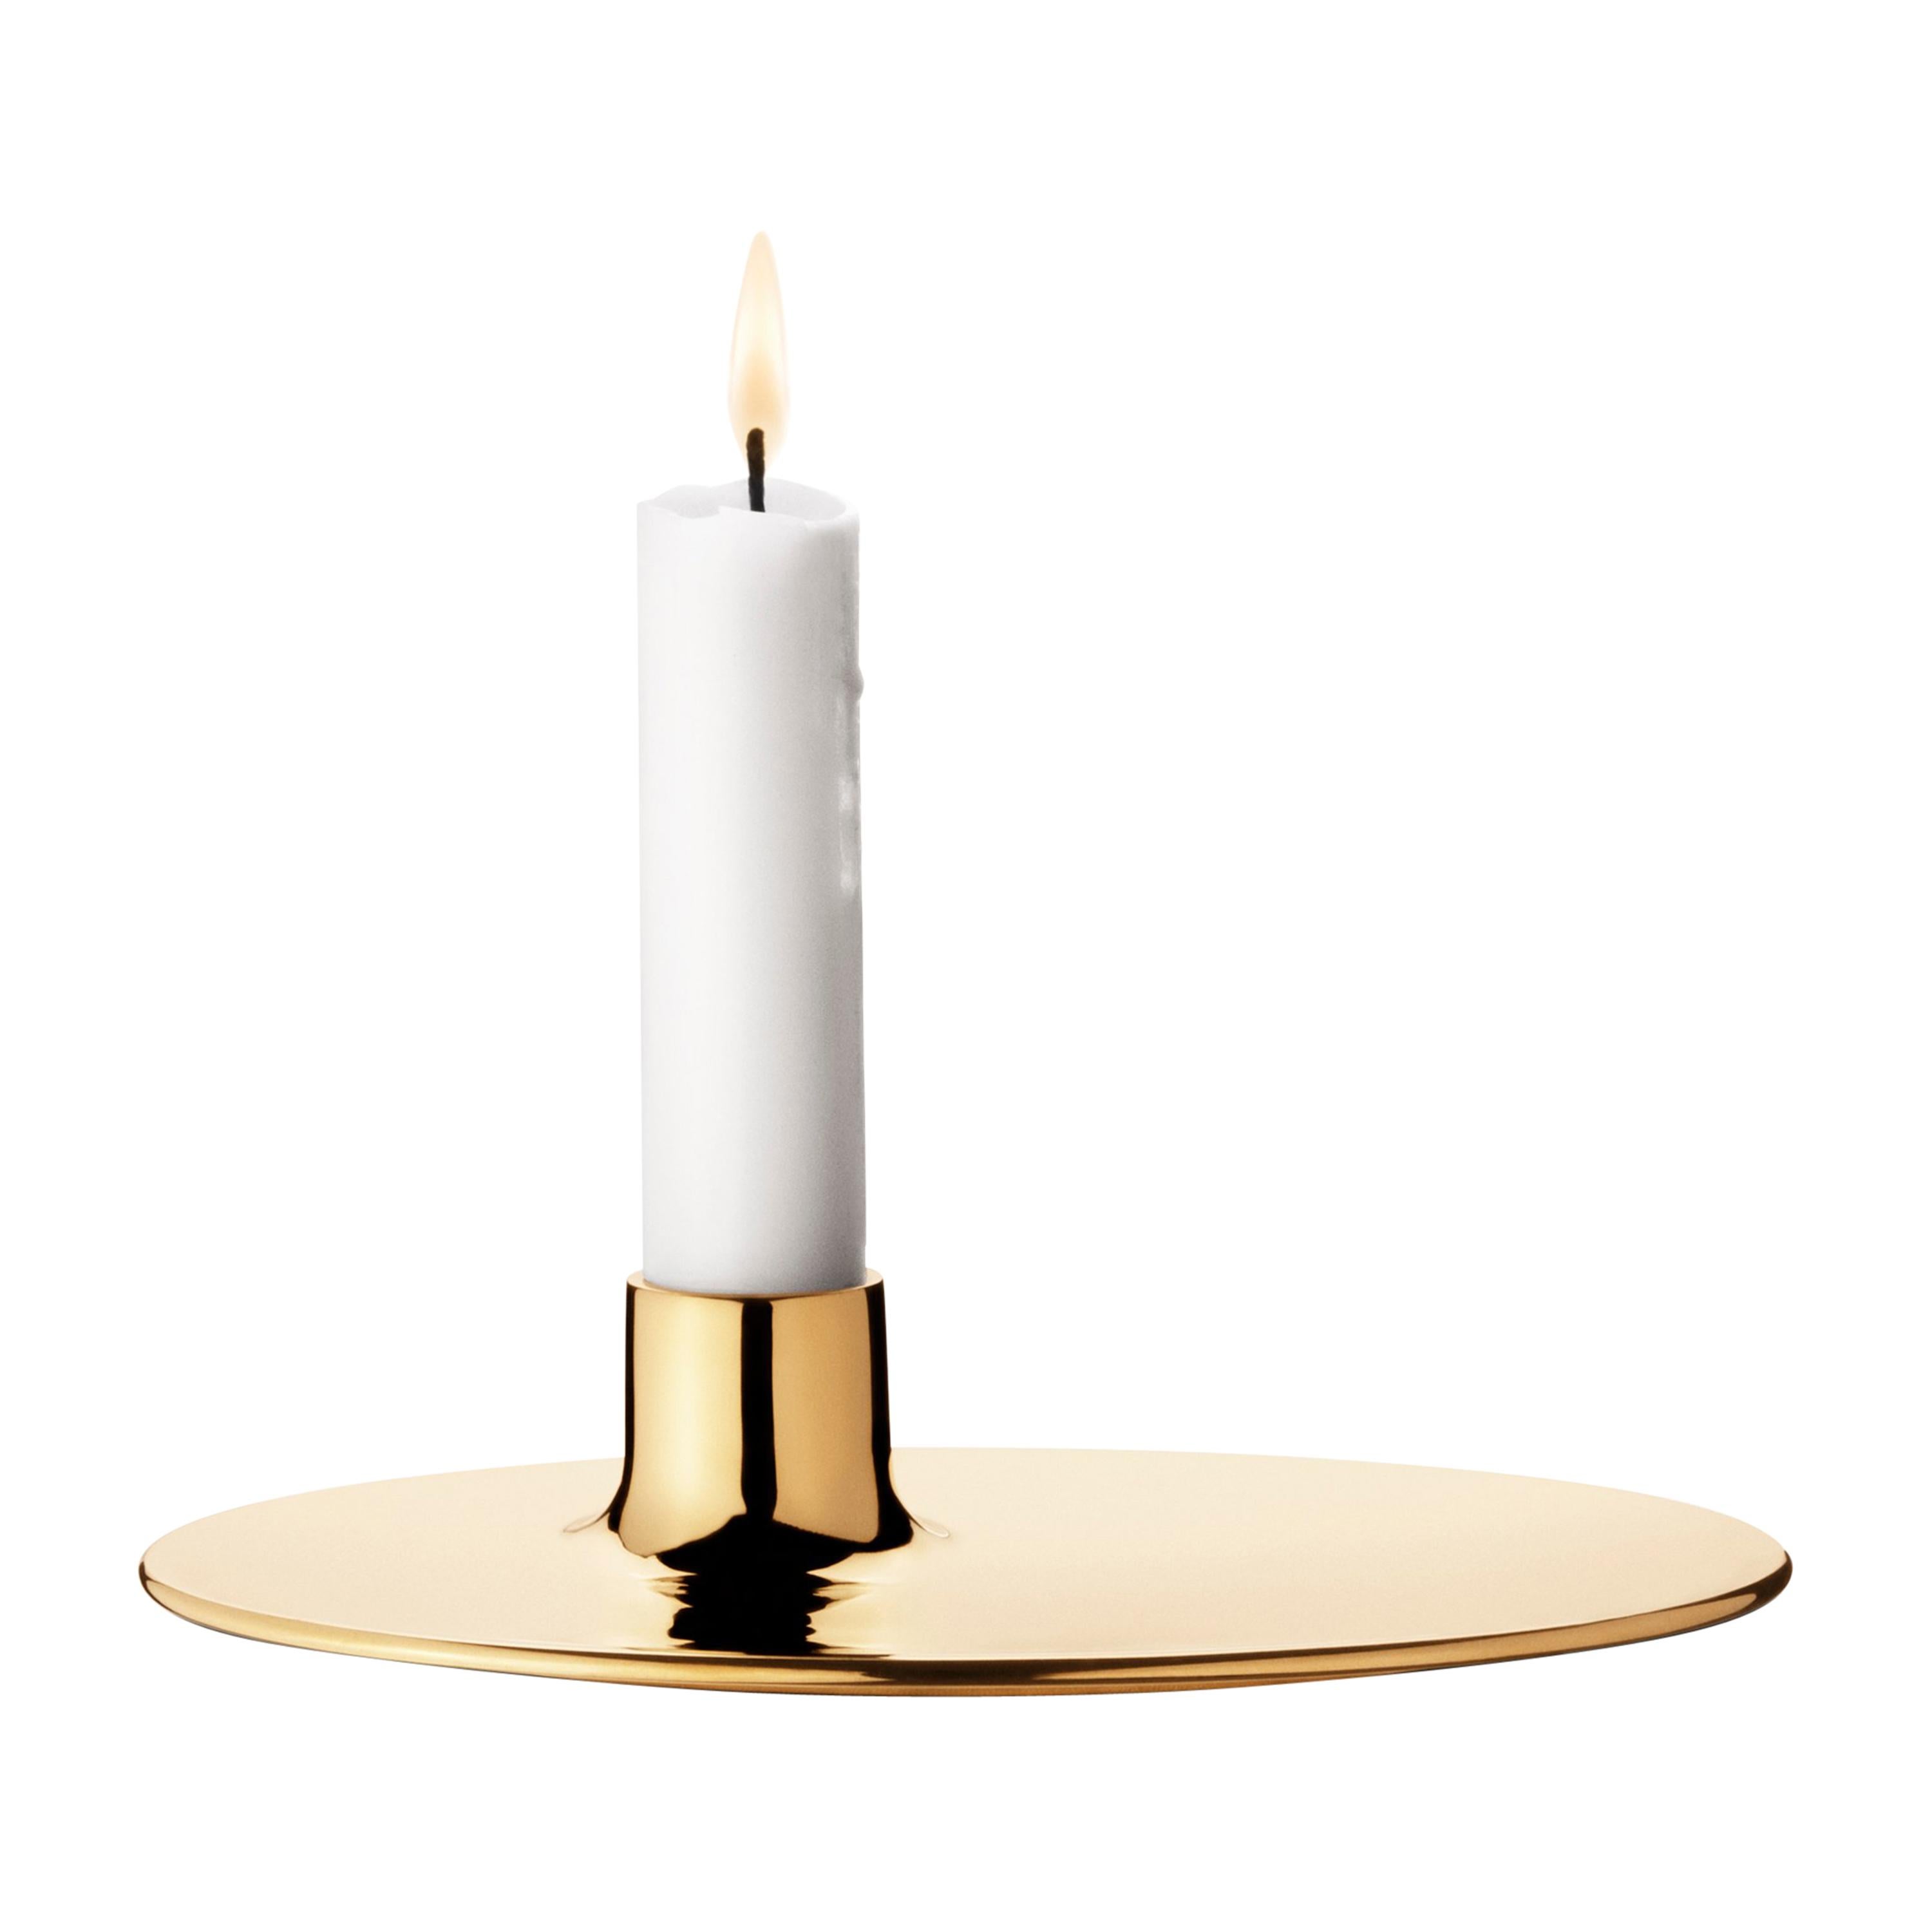 Georg Jensen Candleholder in Brass by Ilse Crawford For Sale